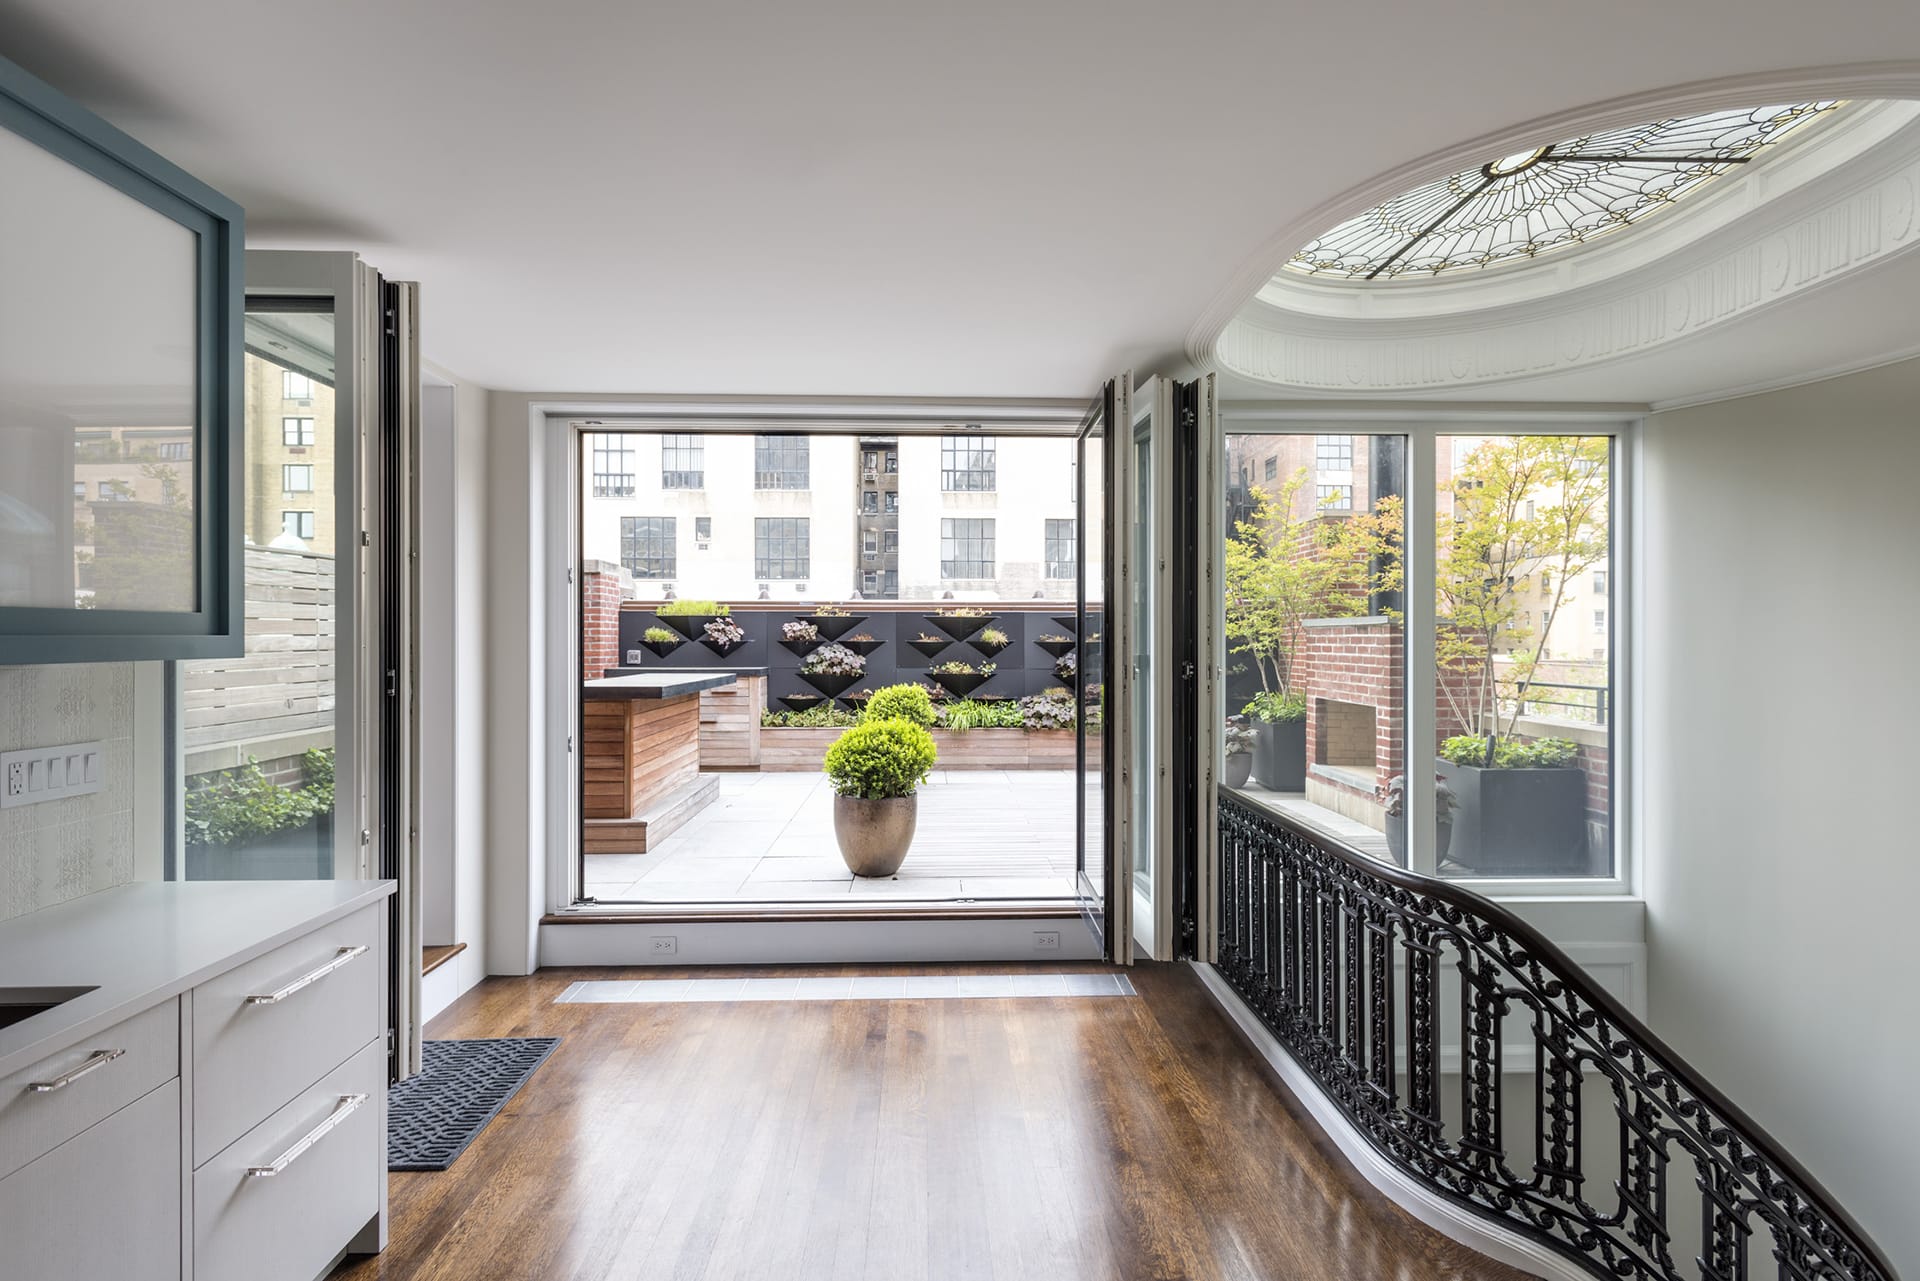 View from the penthouse to the roofdeck of an Upper West Side townhouse.